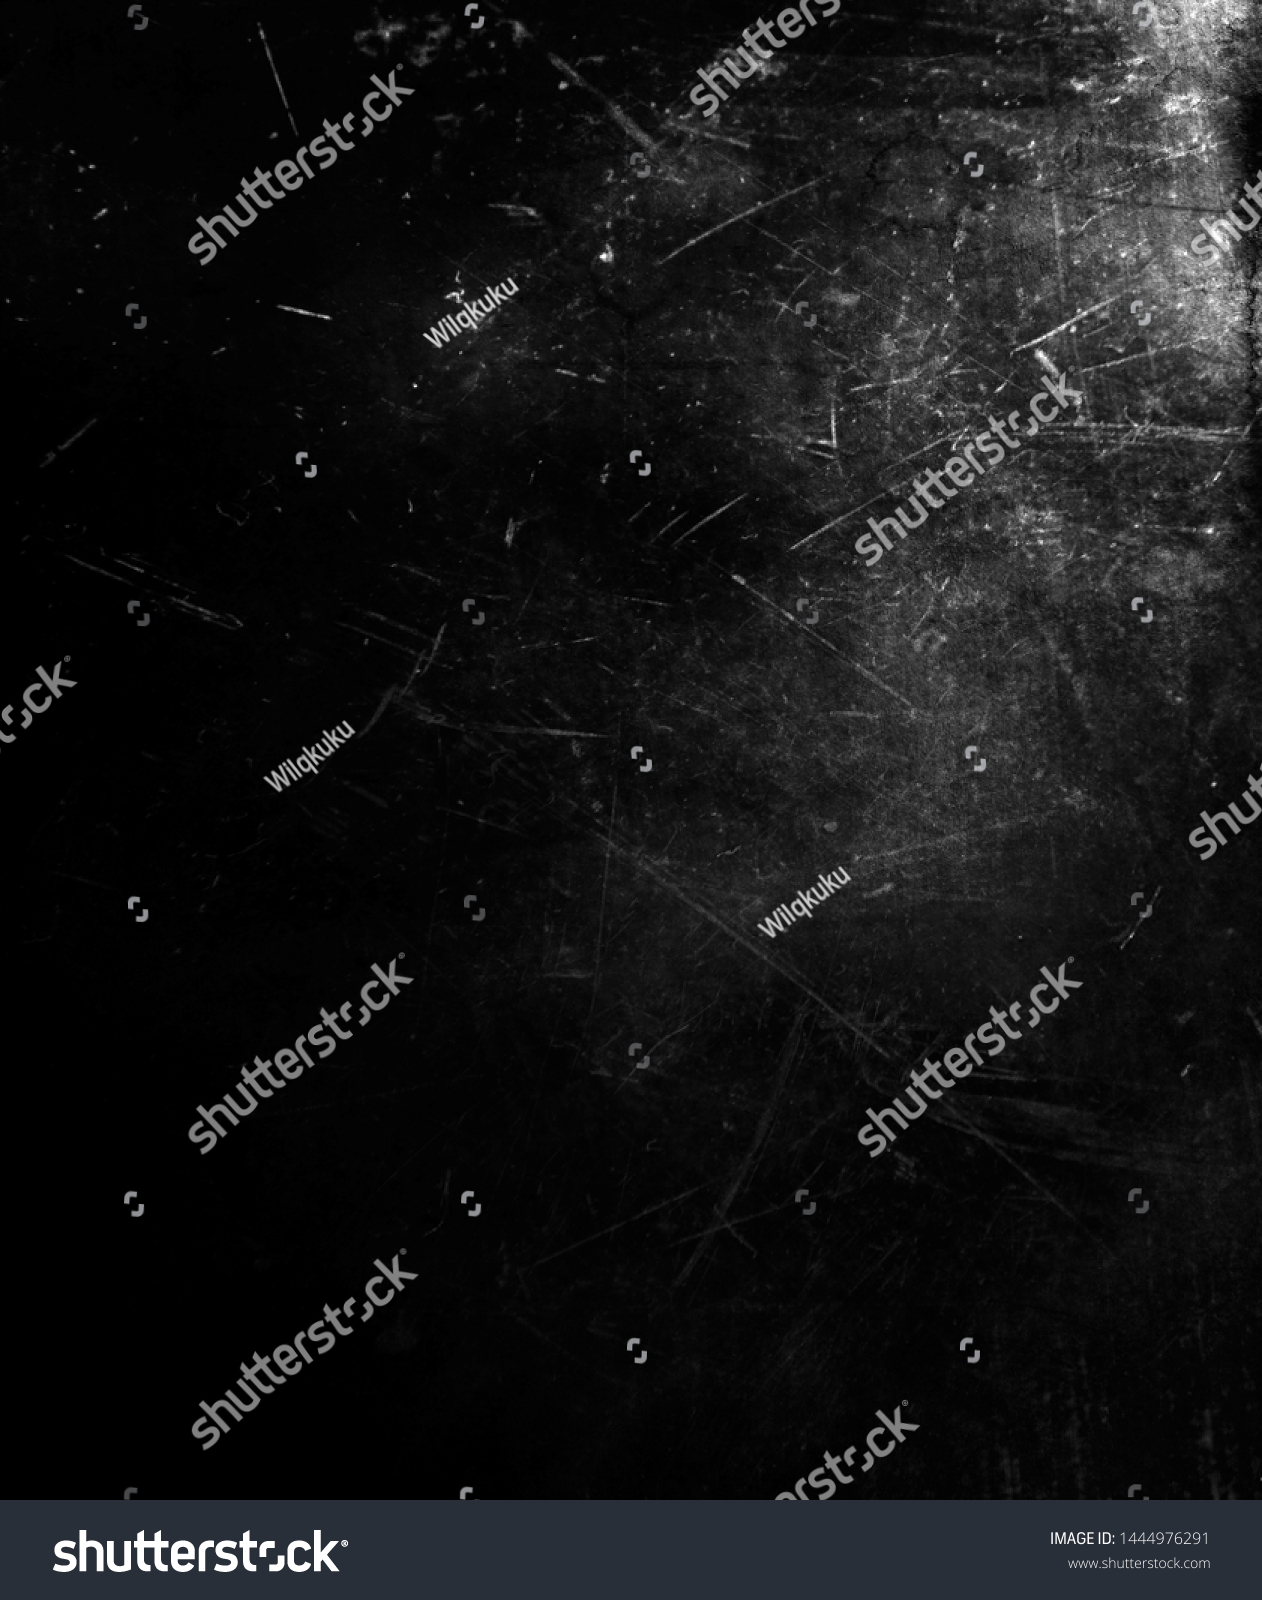 Black scratched grunge background, distressed scary horror texture perfect for halloween concept #1444976291